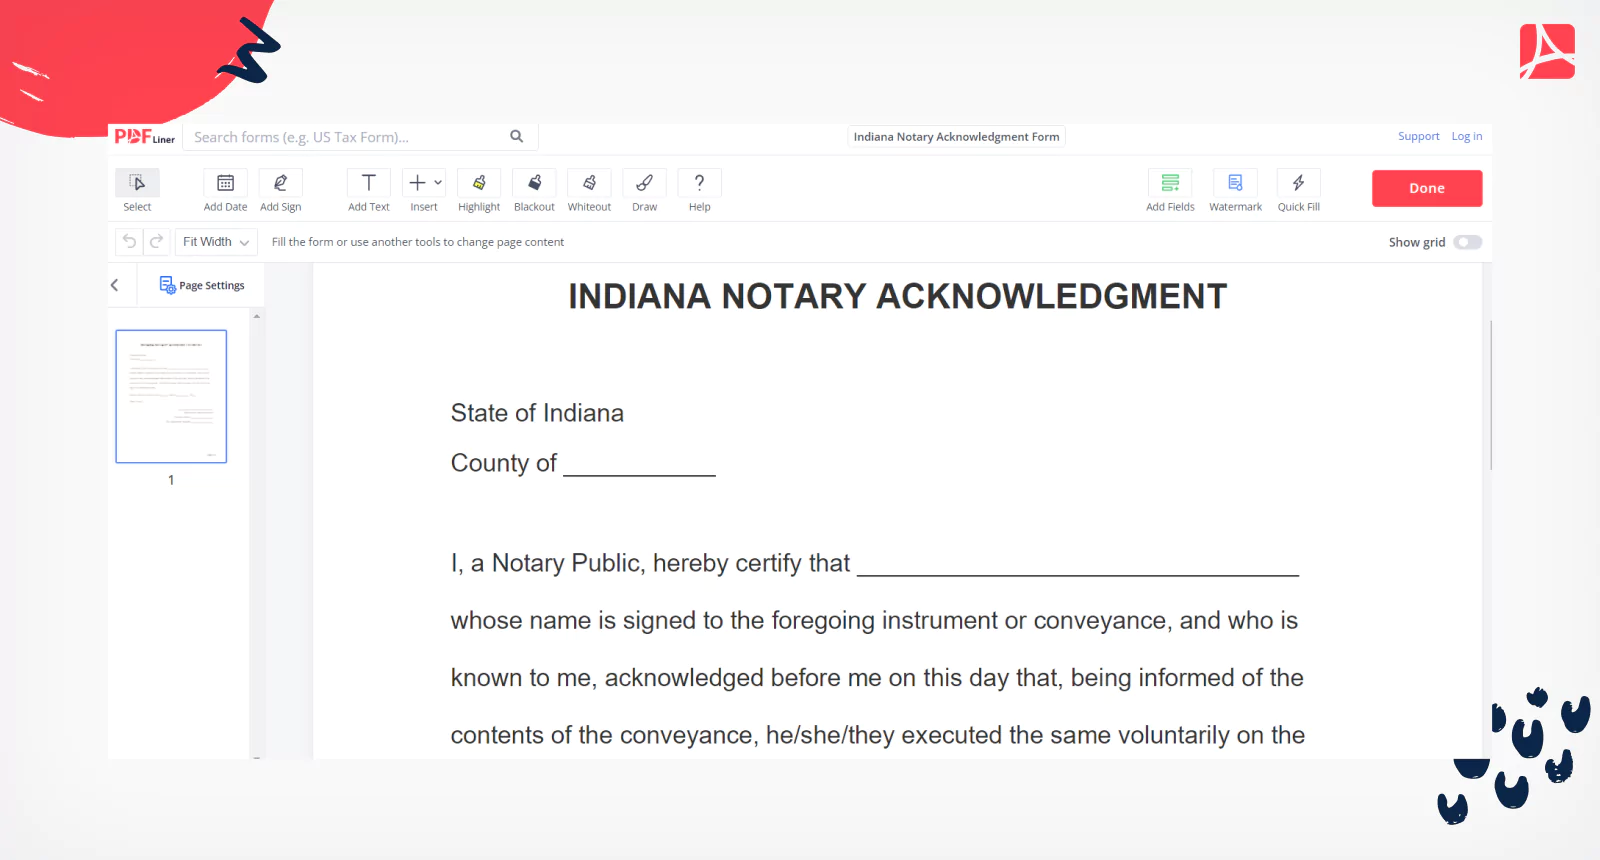 Indiana Notary Acknowledgment Form on PDFLiner